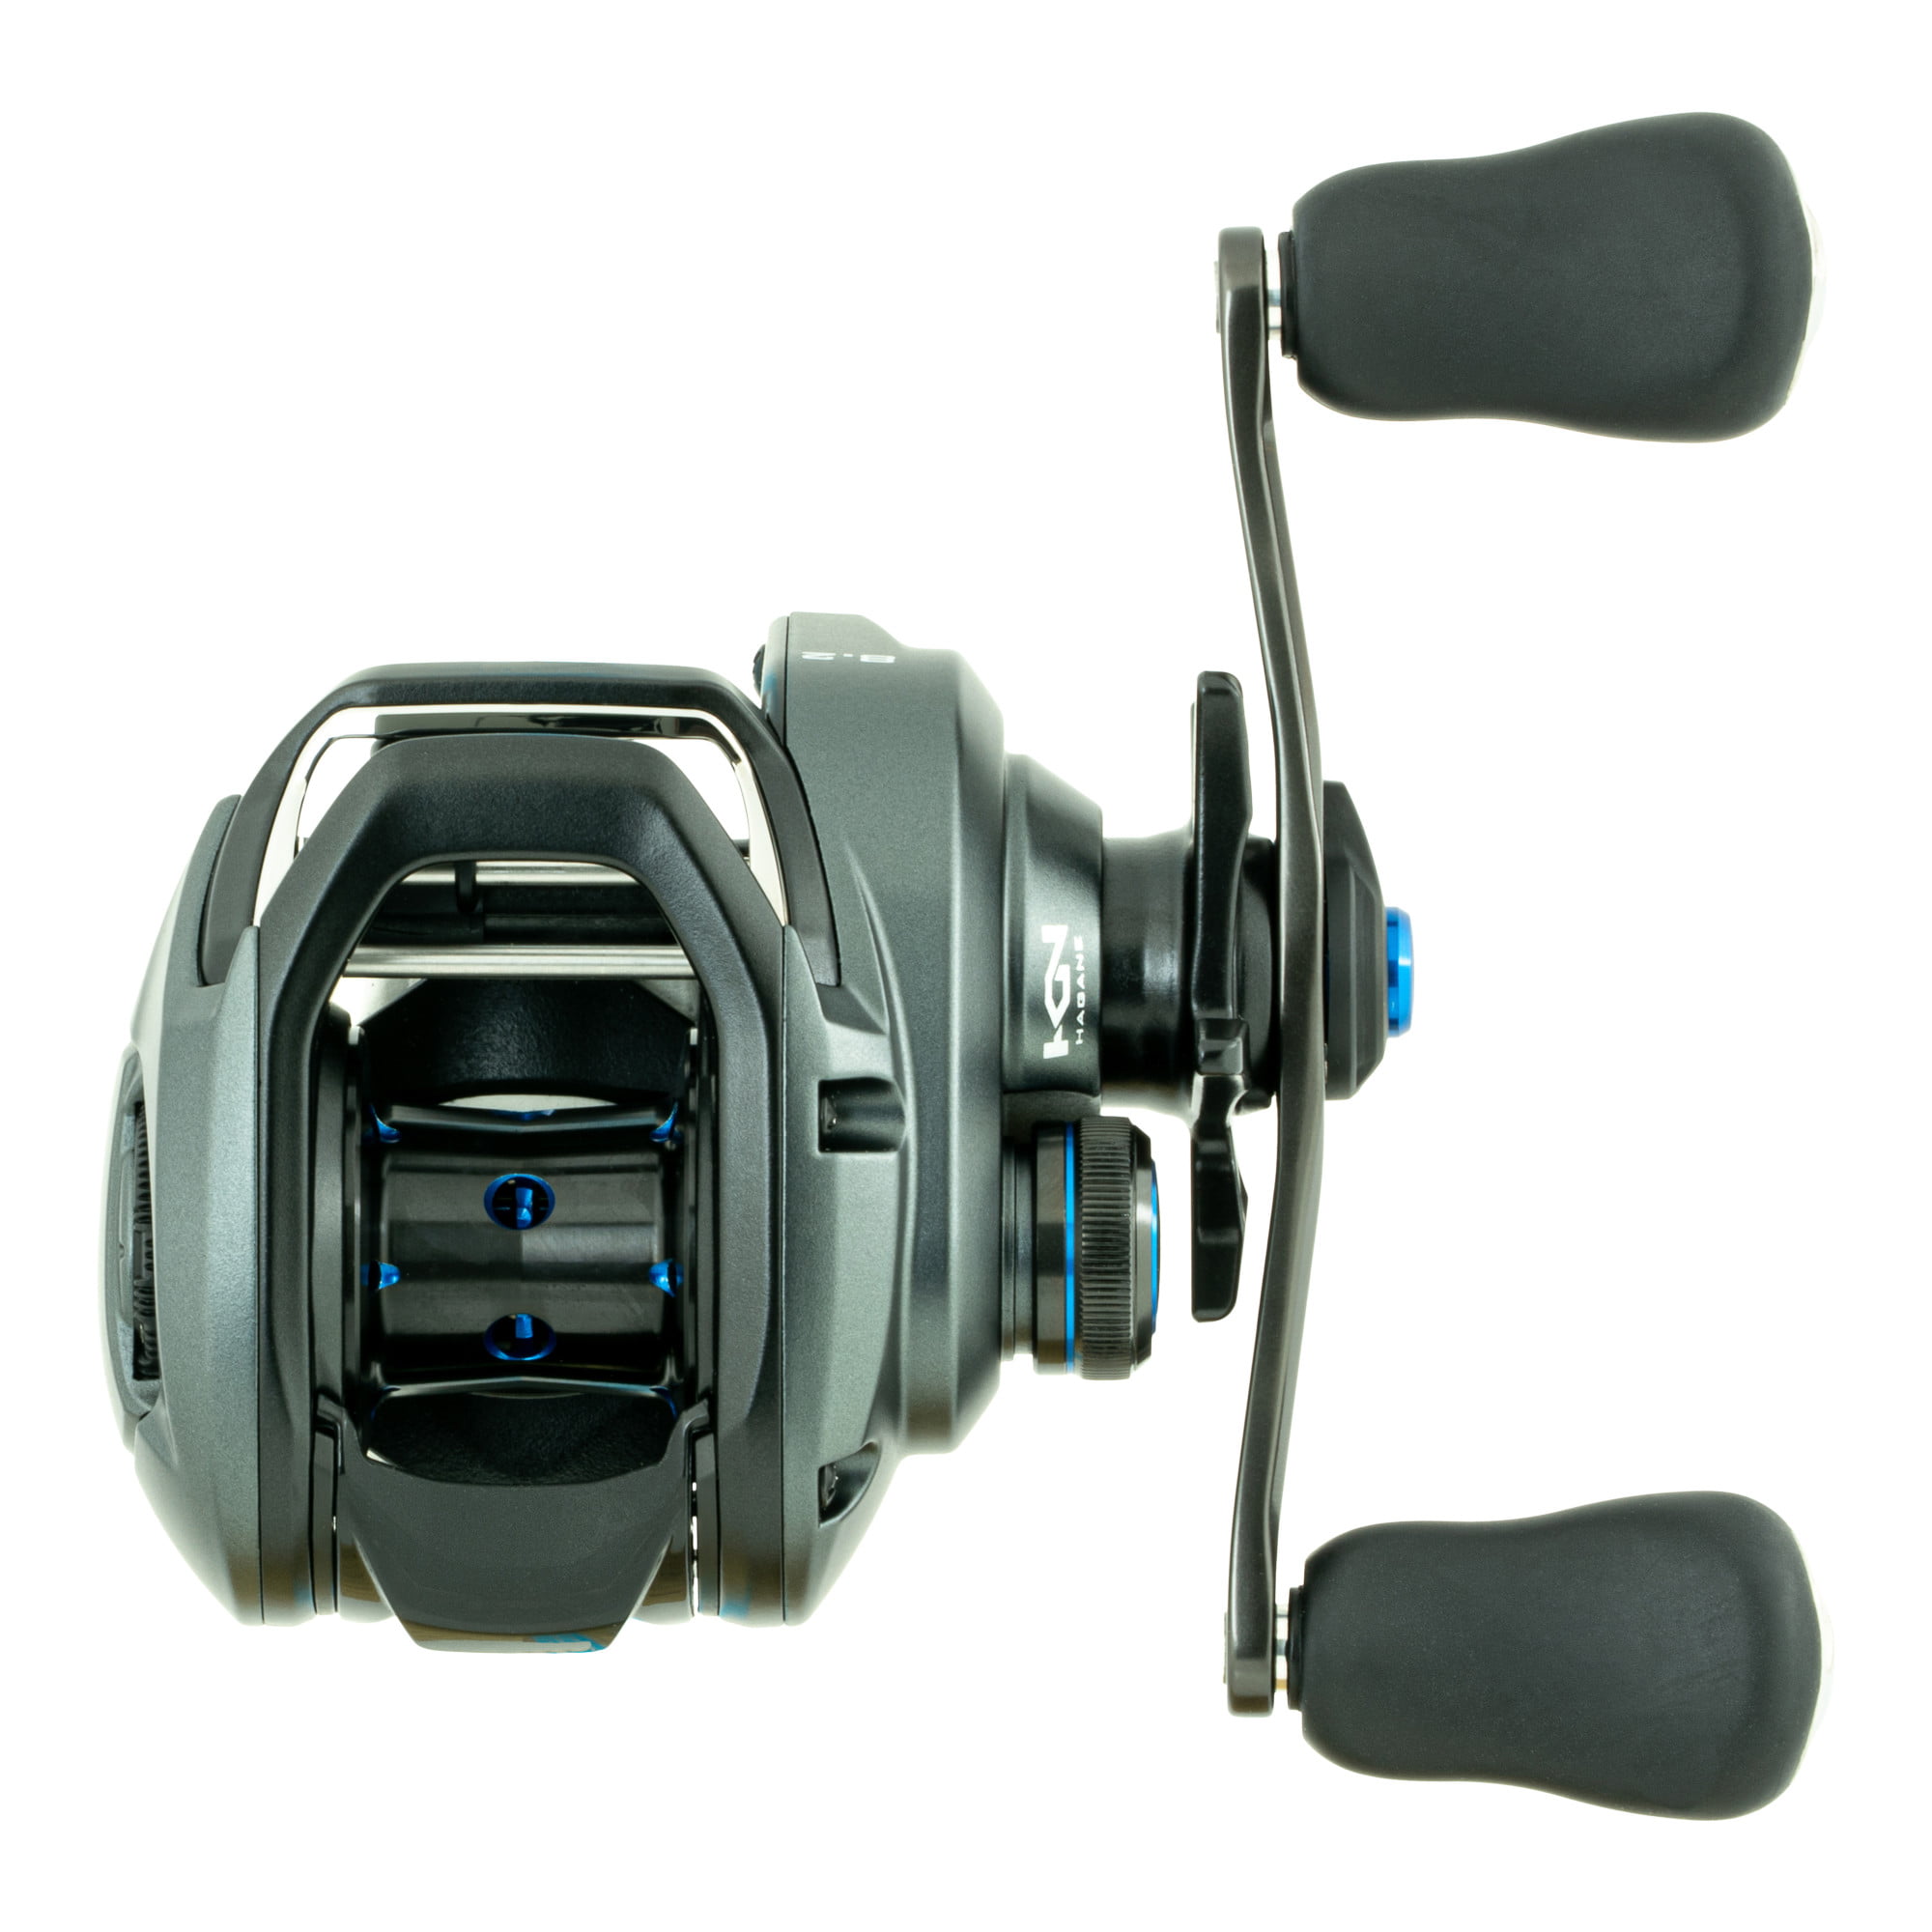 Best items and accessories for those looking for shimano slx xt dc 71 at  the best price - Research Tognini pesca